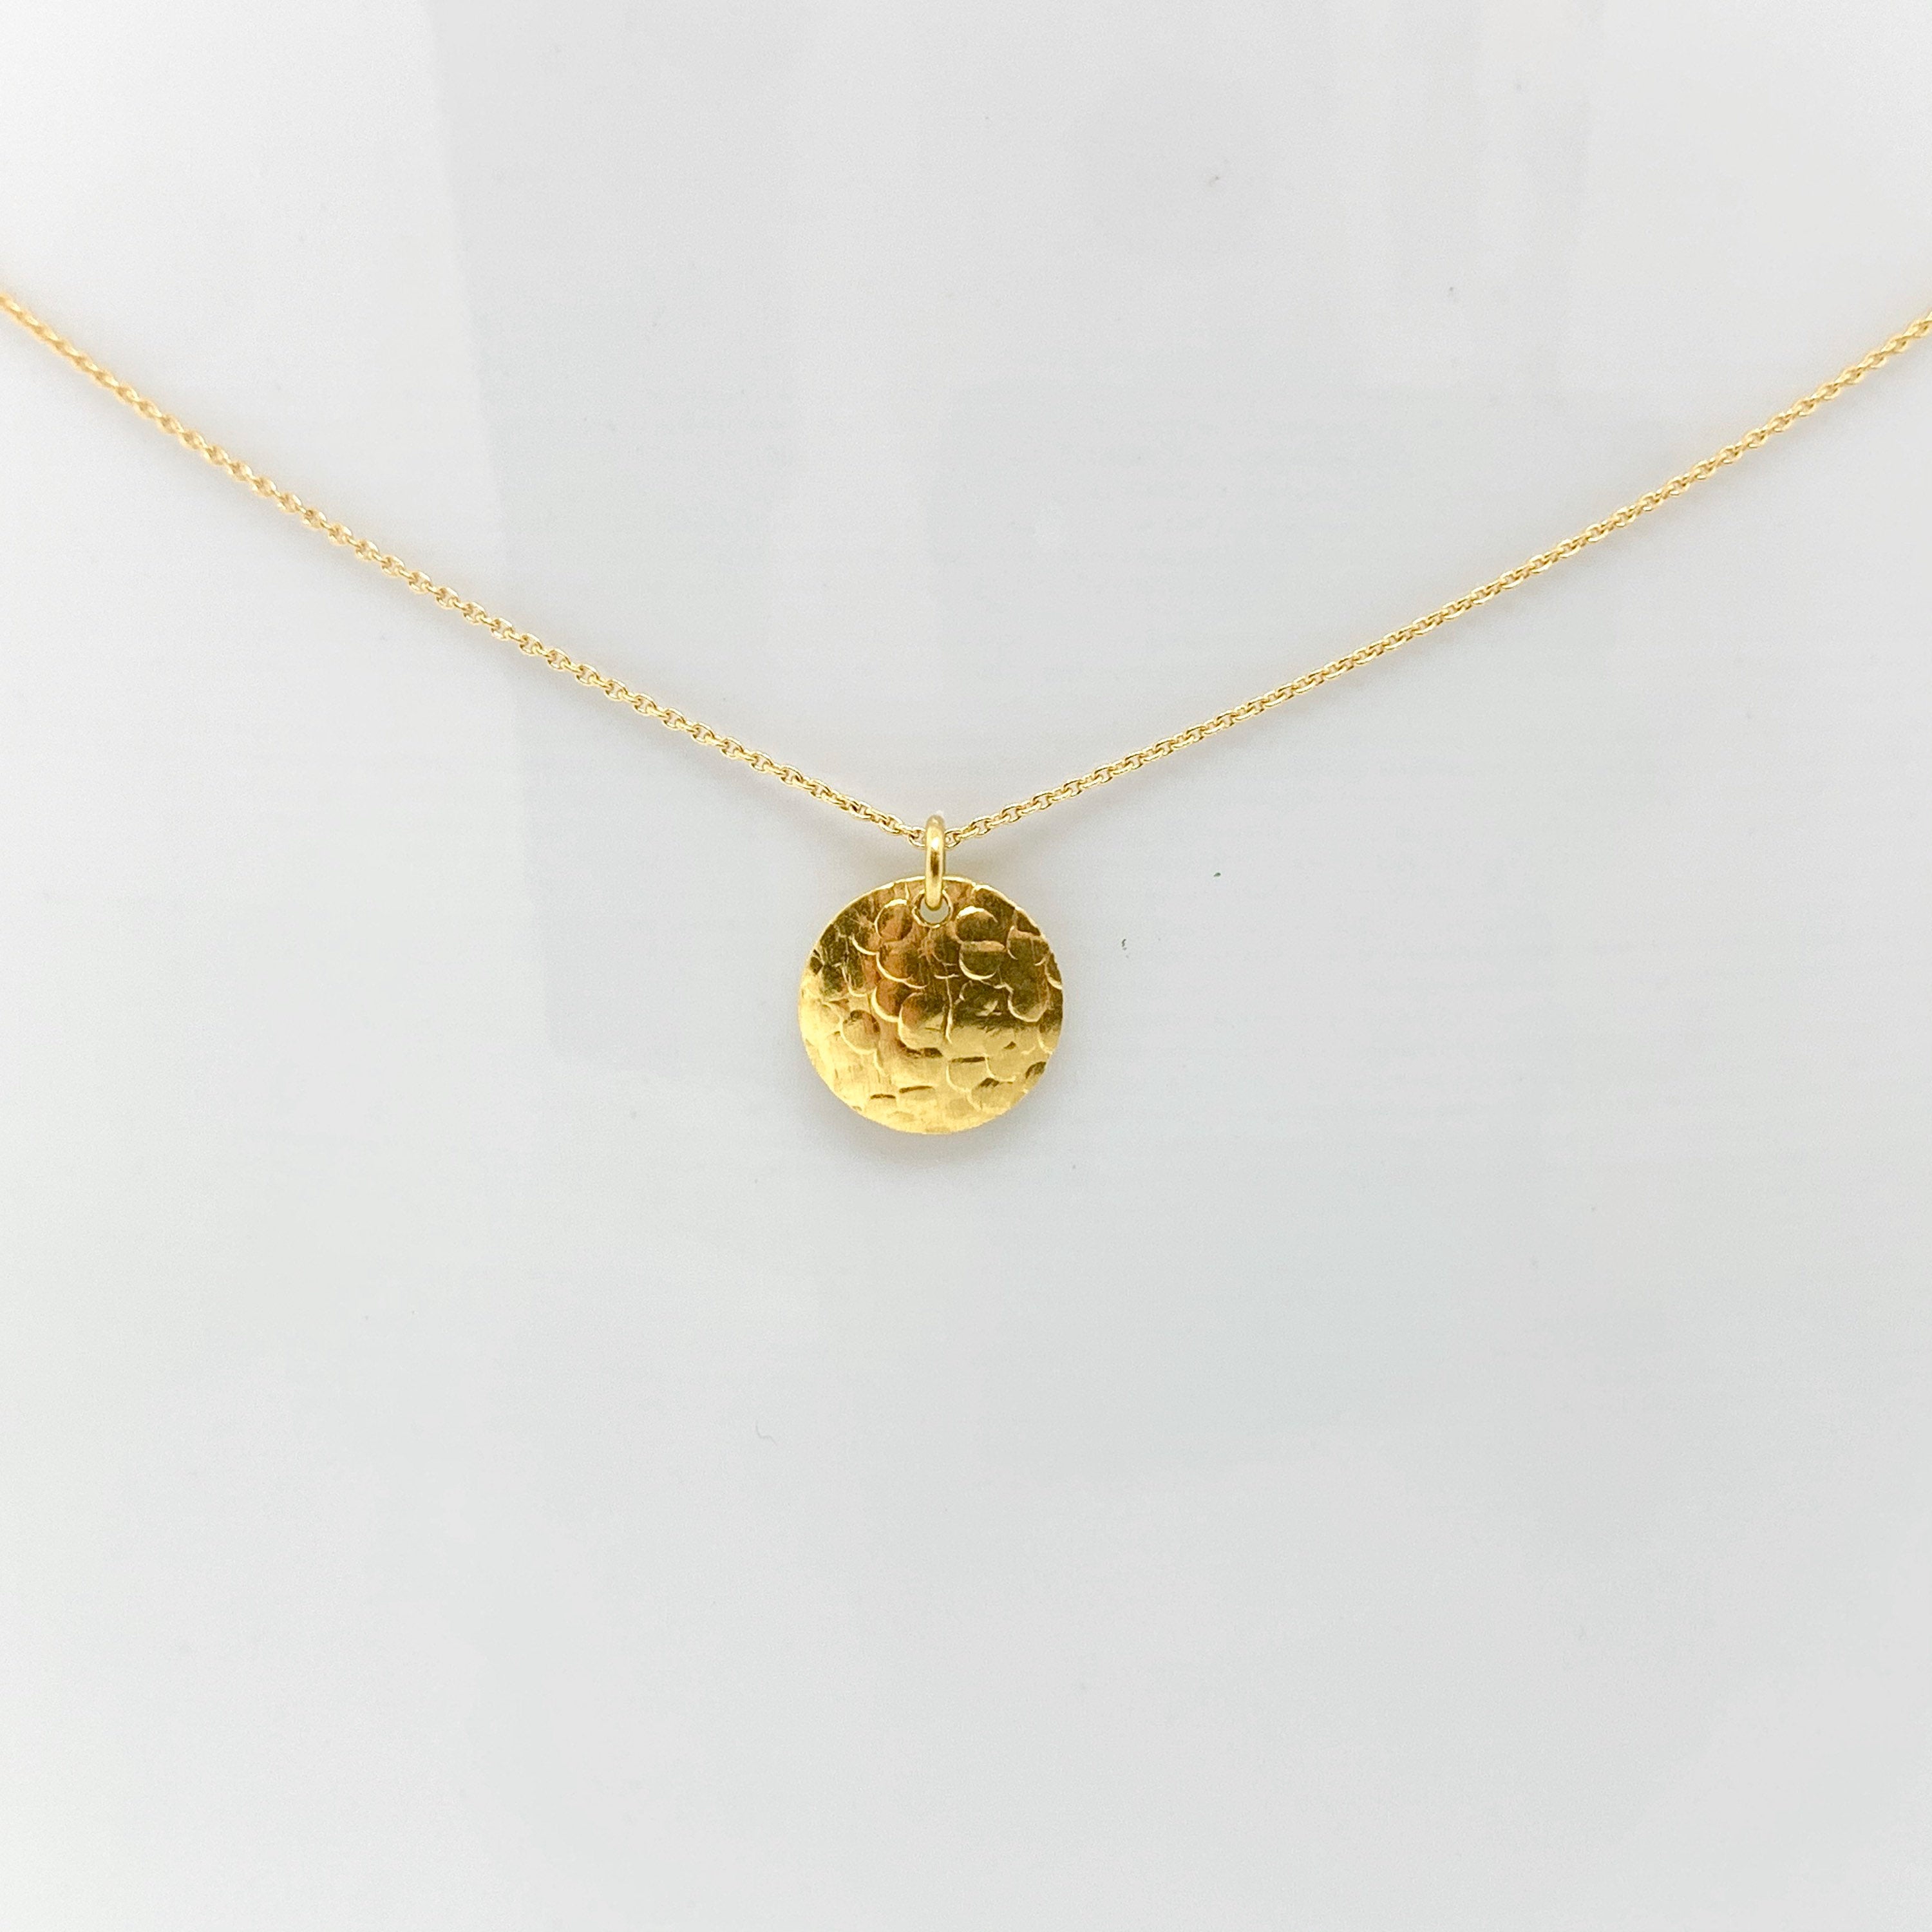 18K Gold Long Chain Pendant Necklace - Disk Charm Pendant - 14 K Gold Jewelry - Chain With Pendant - Gf Birthday Gift